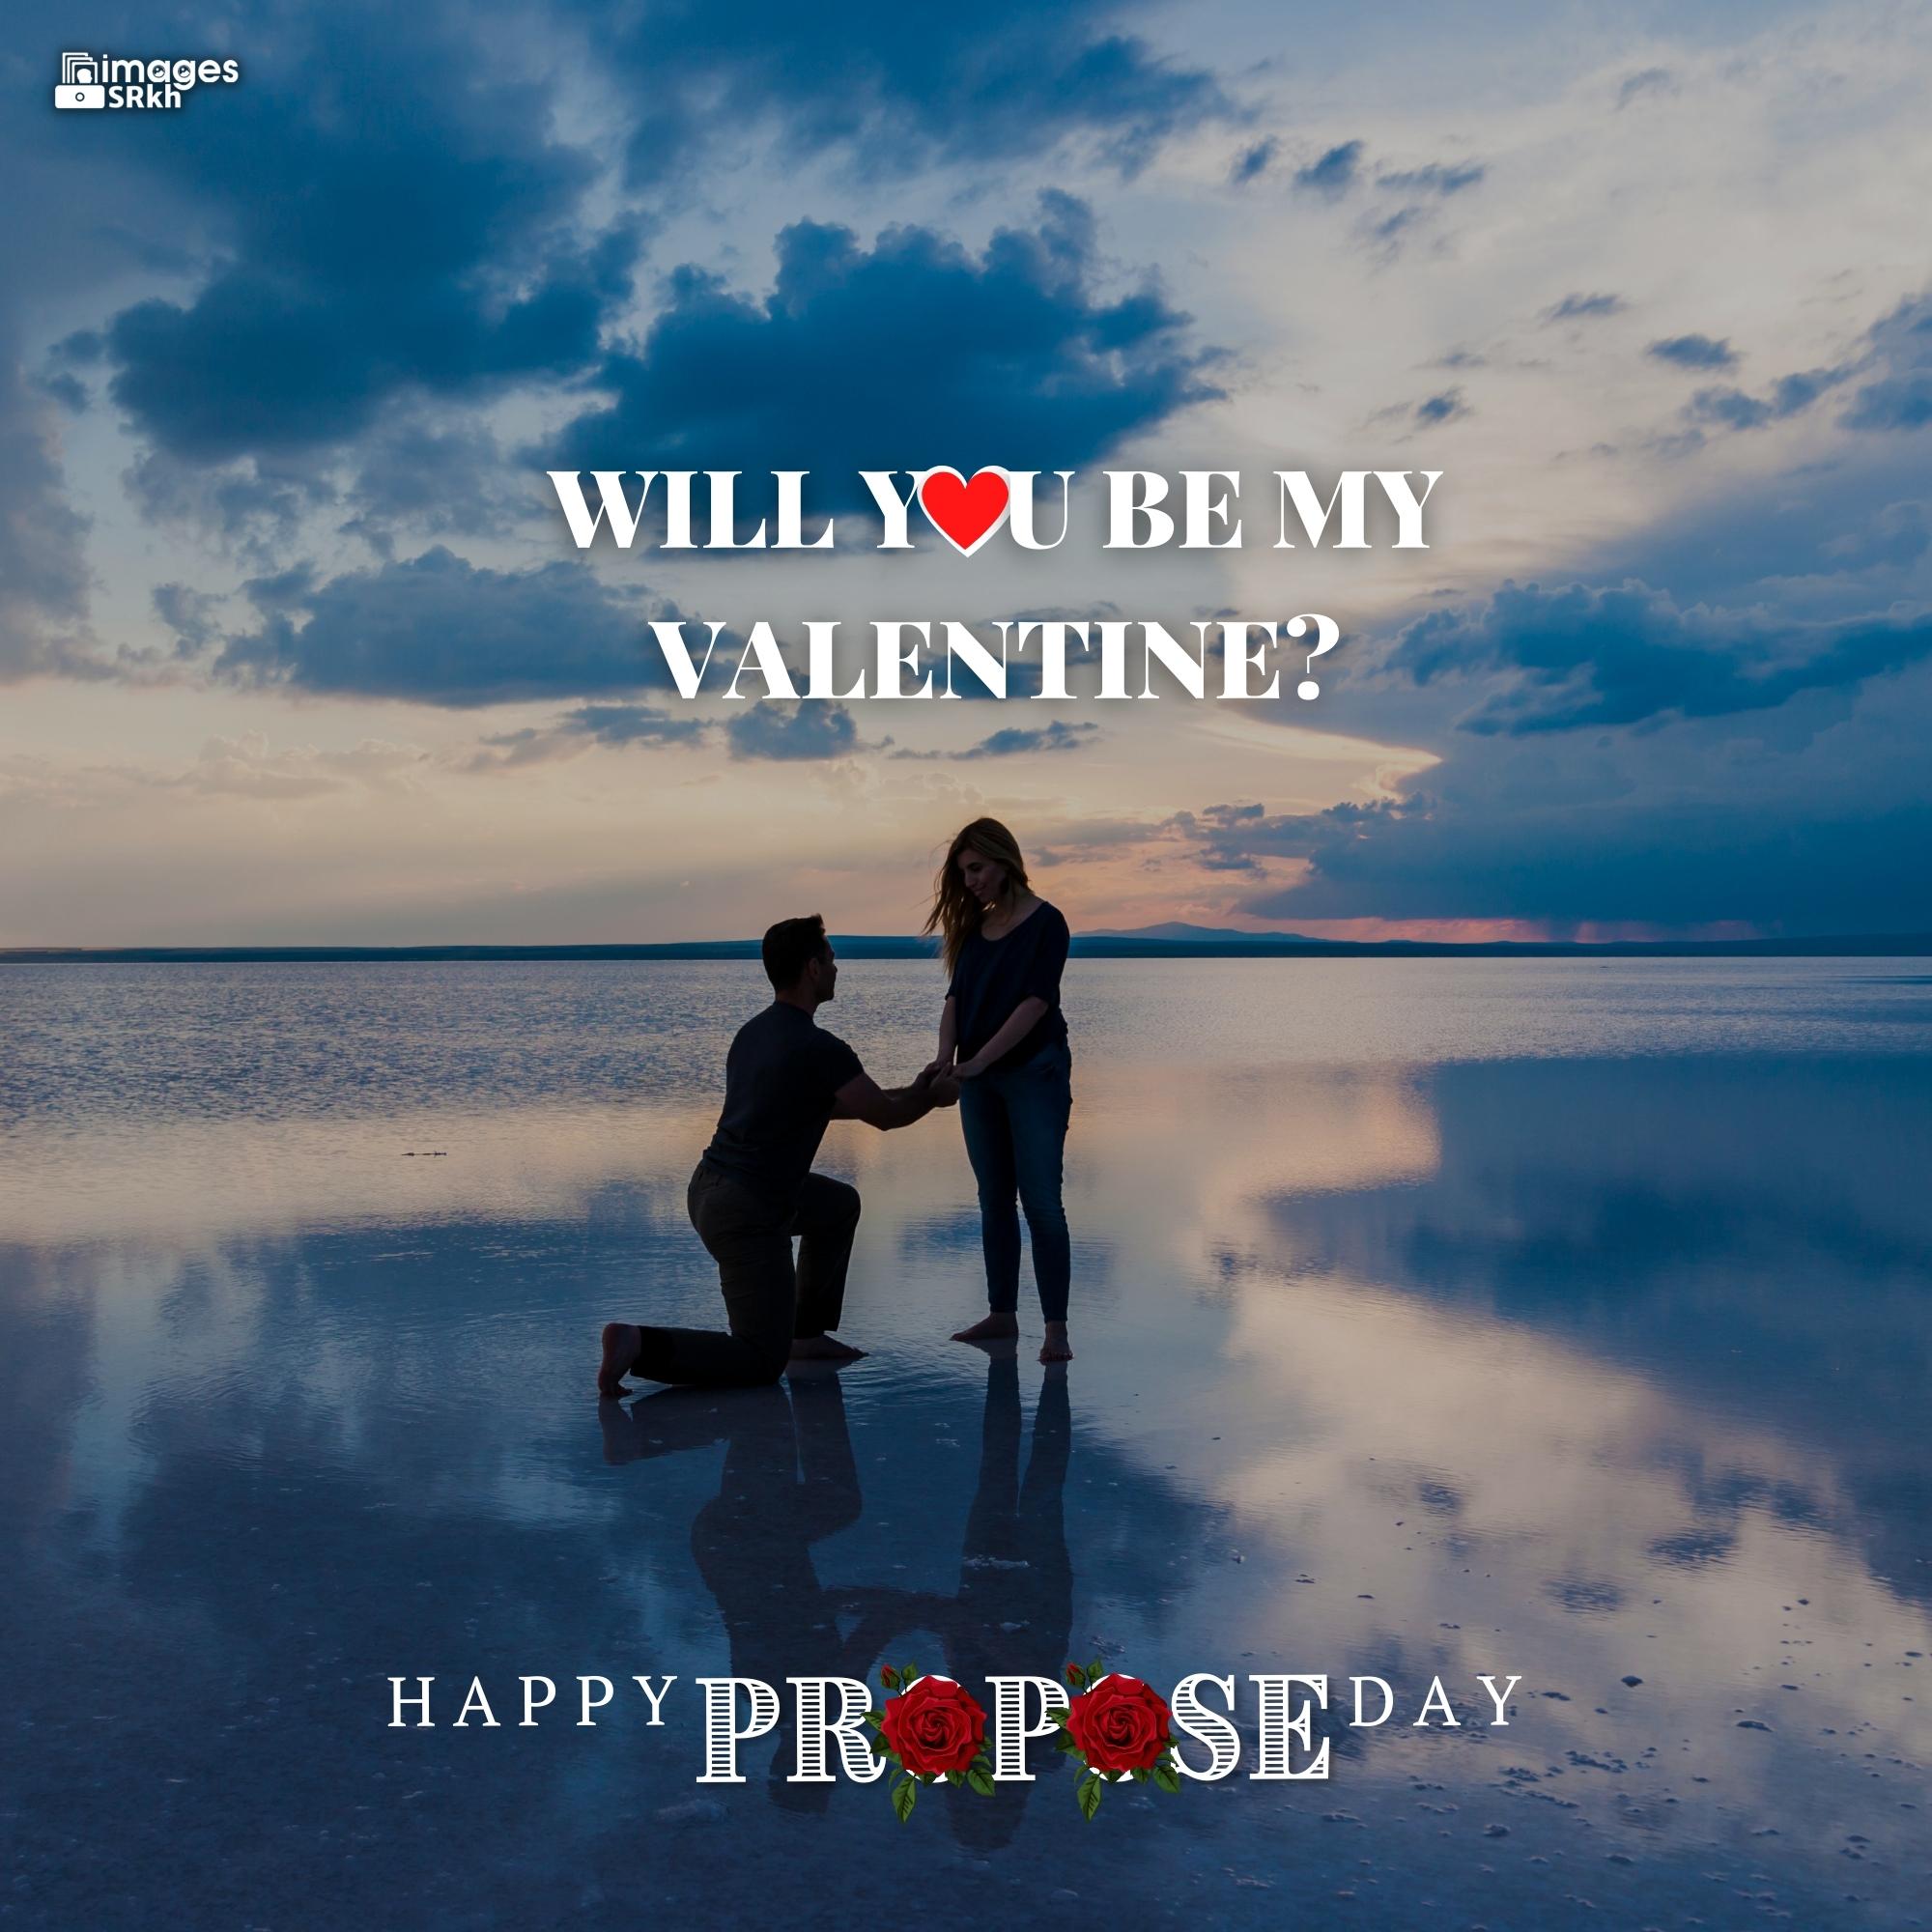 Propose Day Images | 216 | Will You Be My Valentine